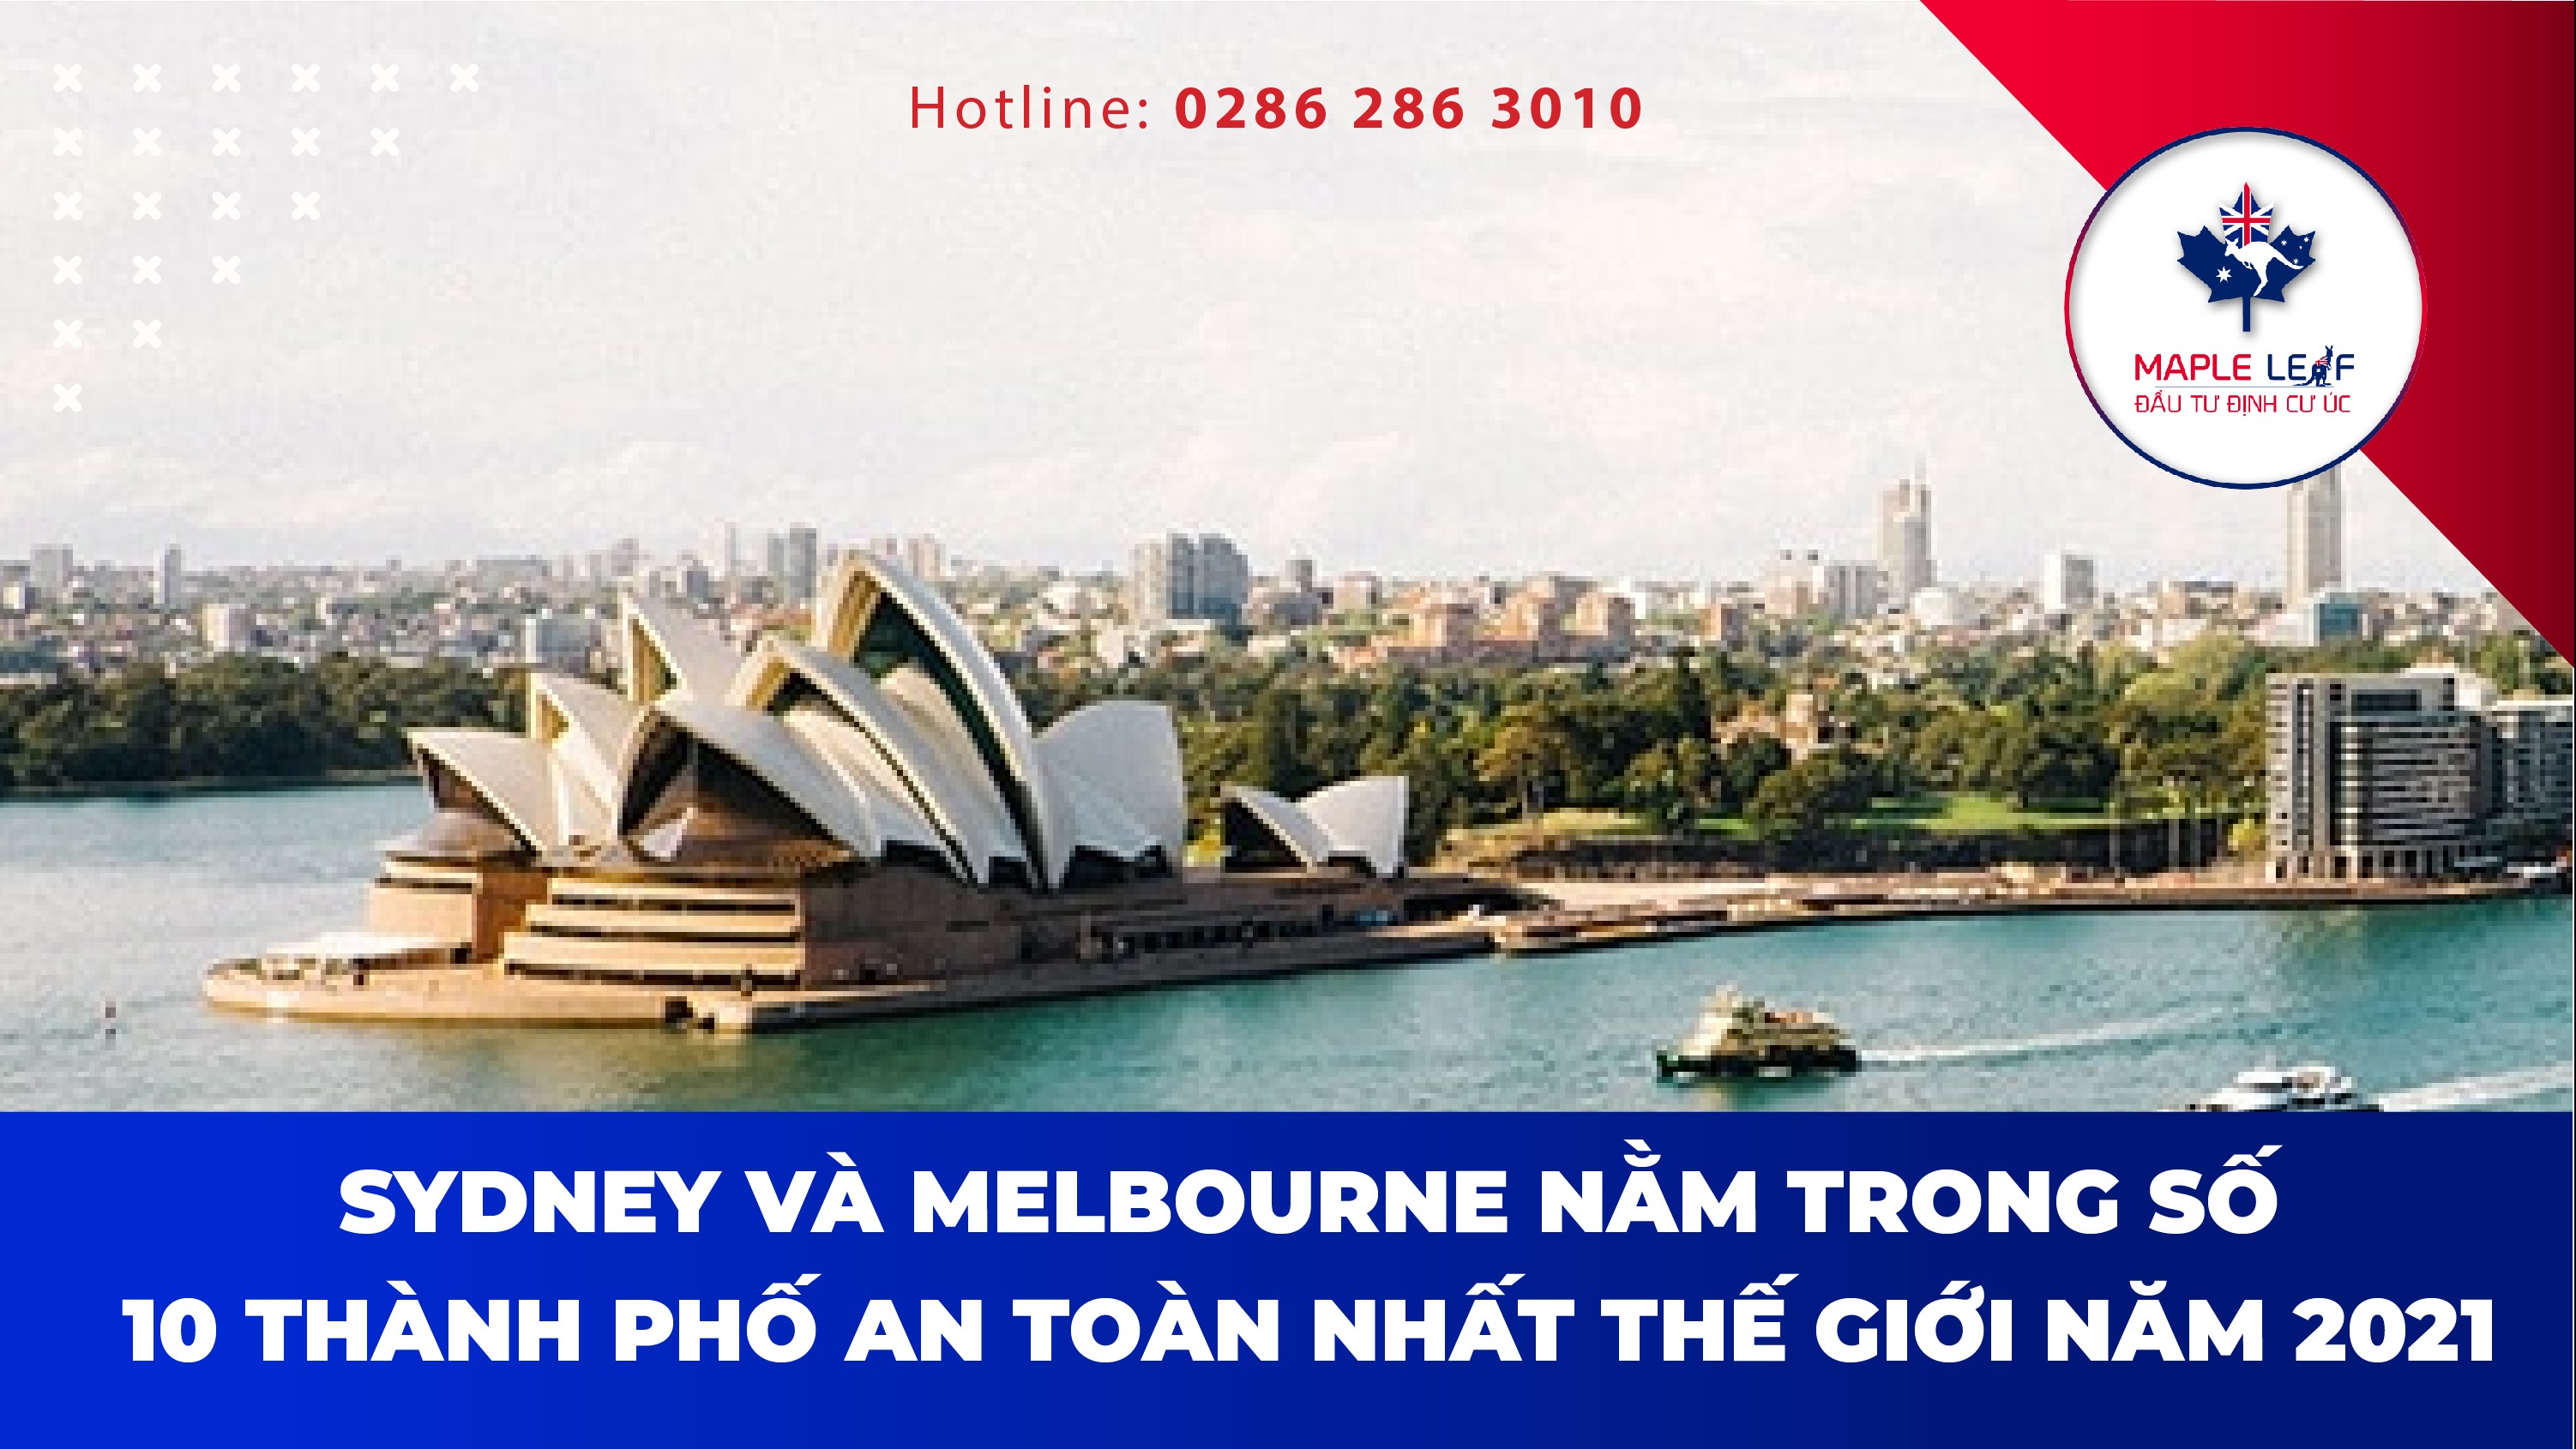 sydney-va-melbourne-nam-trong-so-10-thanh-pho-an-toan-nhat-the-gioi-nam-2021